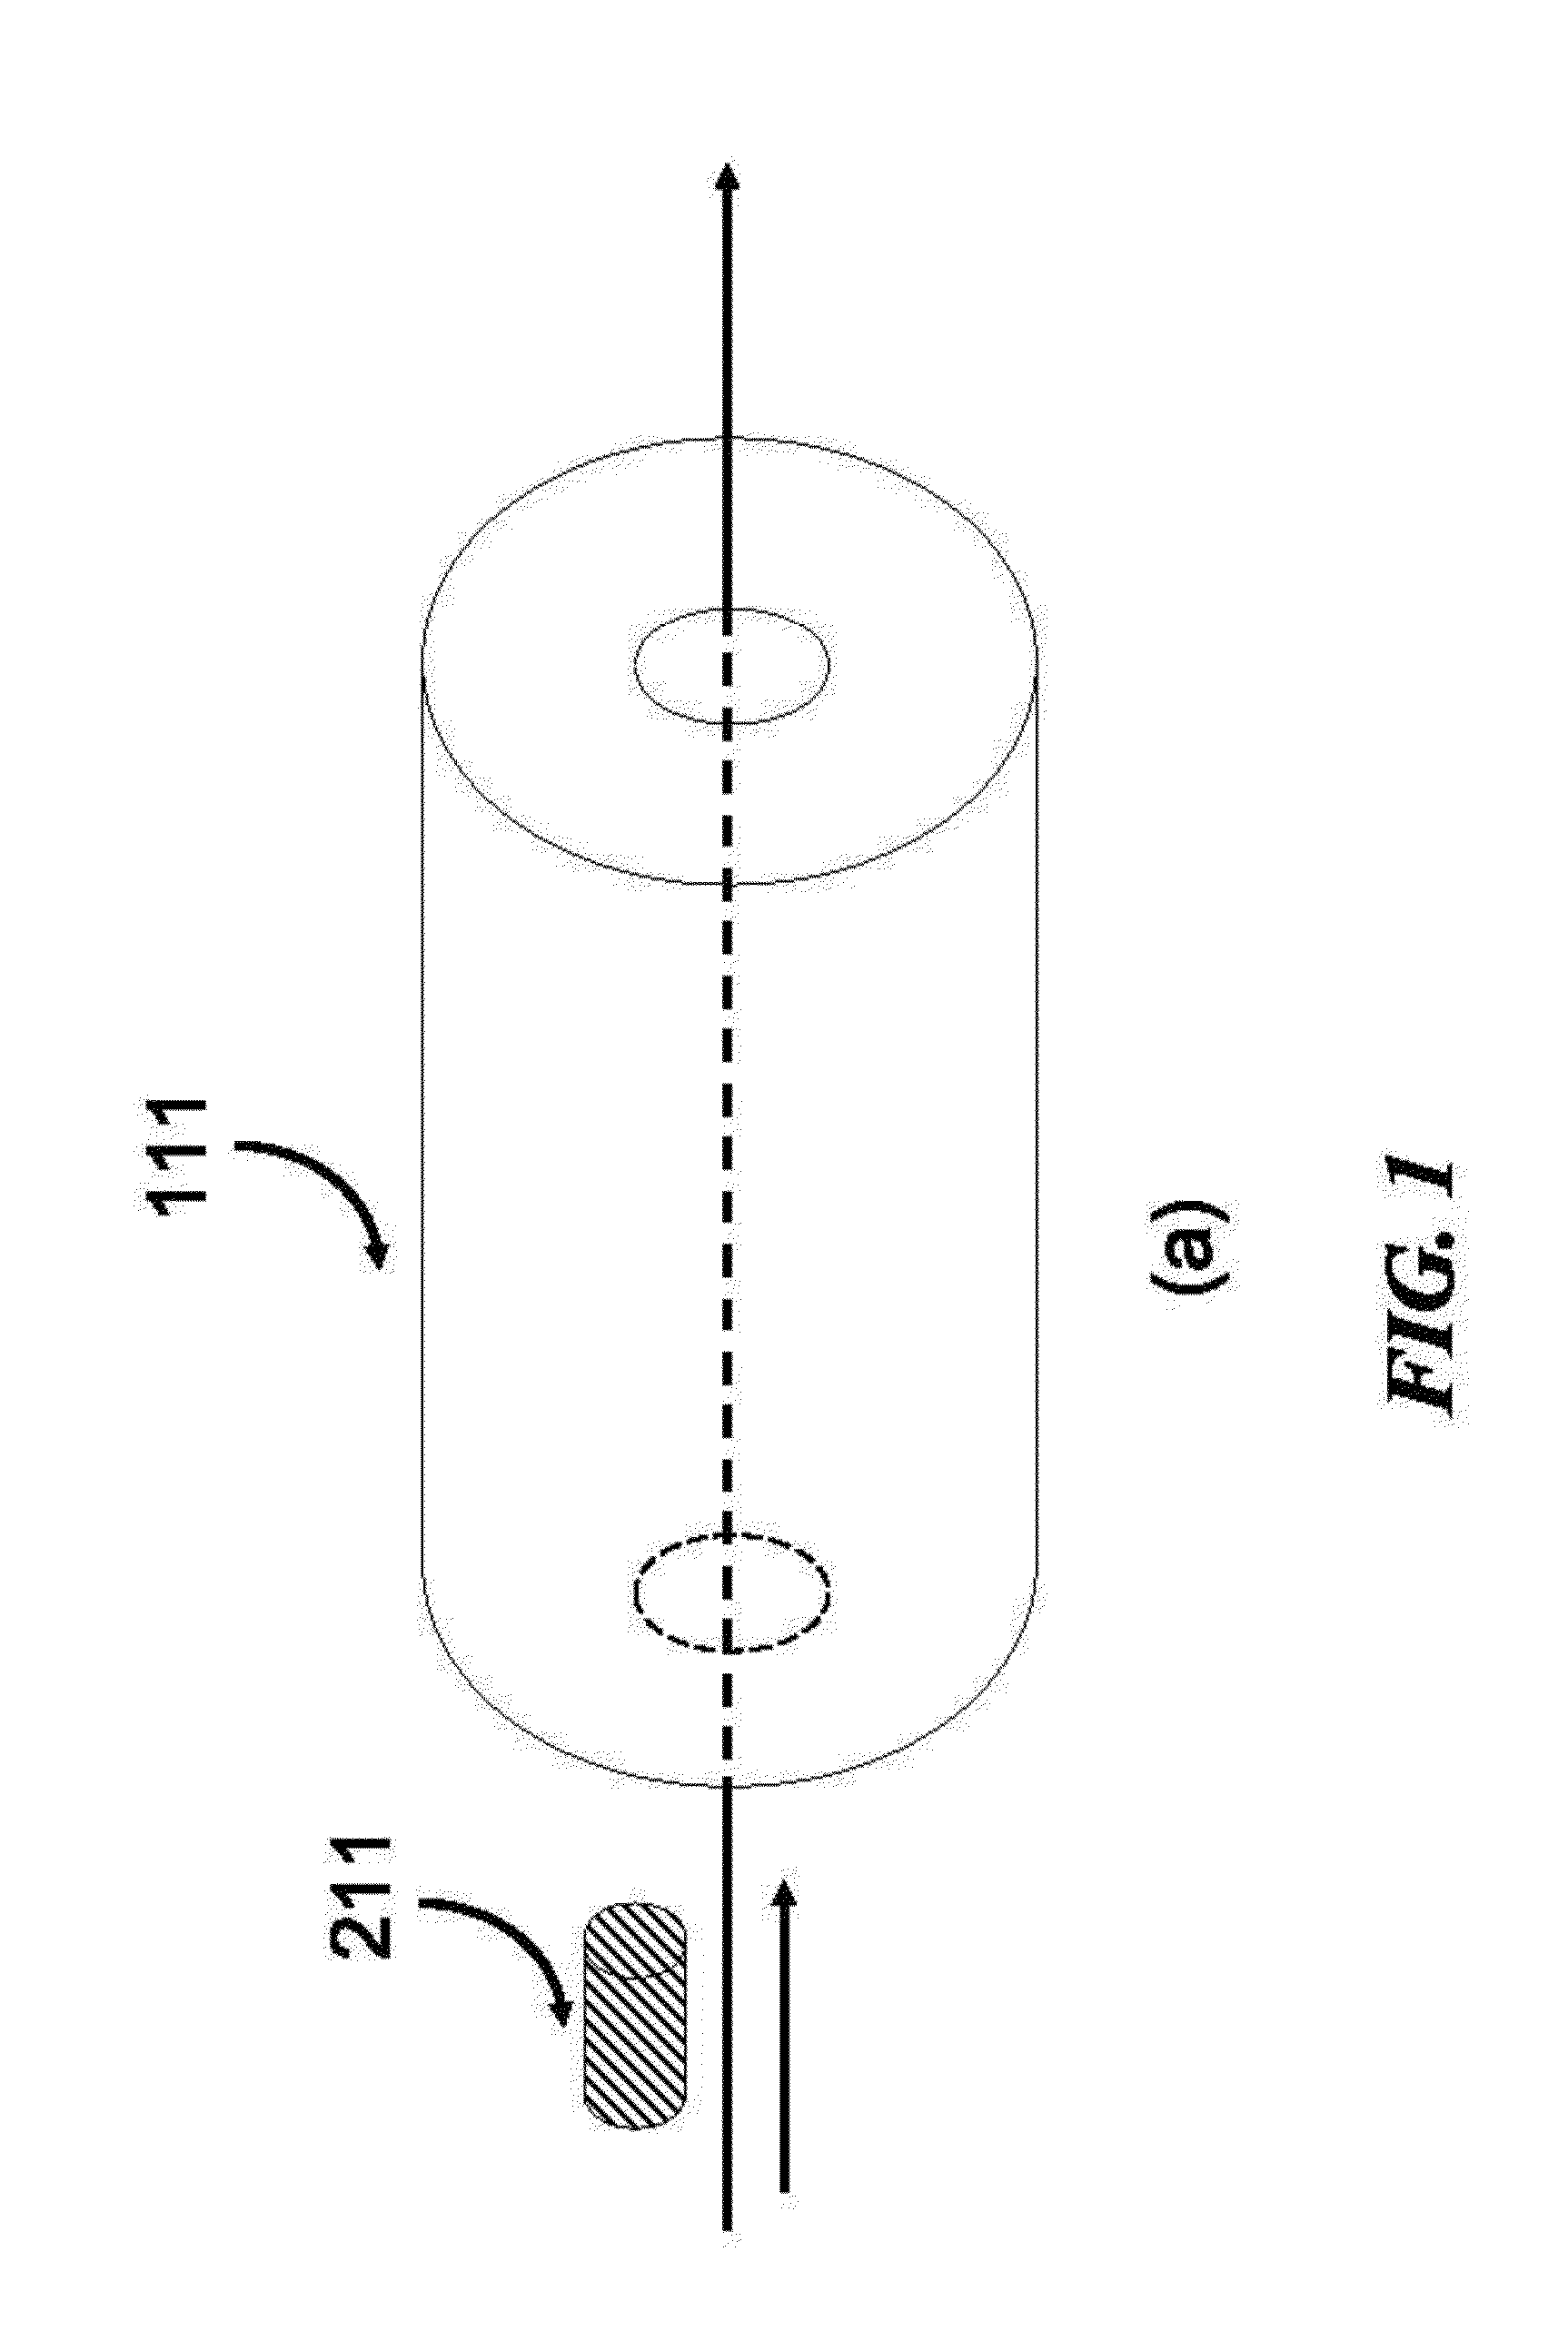 Devices for detecting or filtering tumor cells